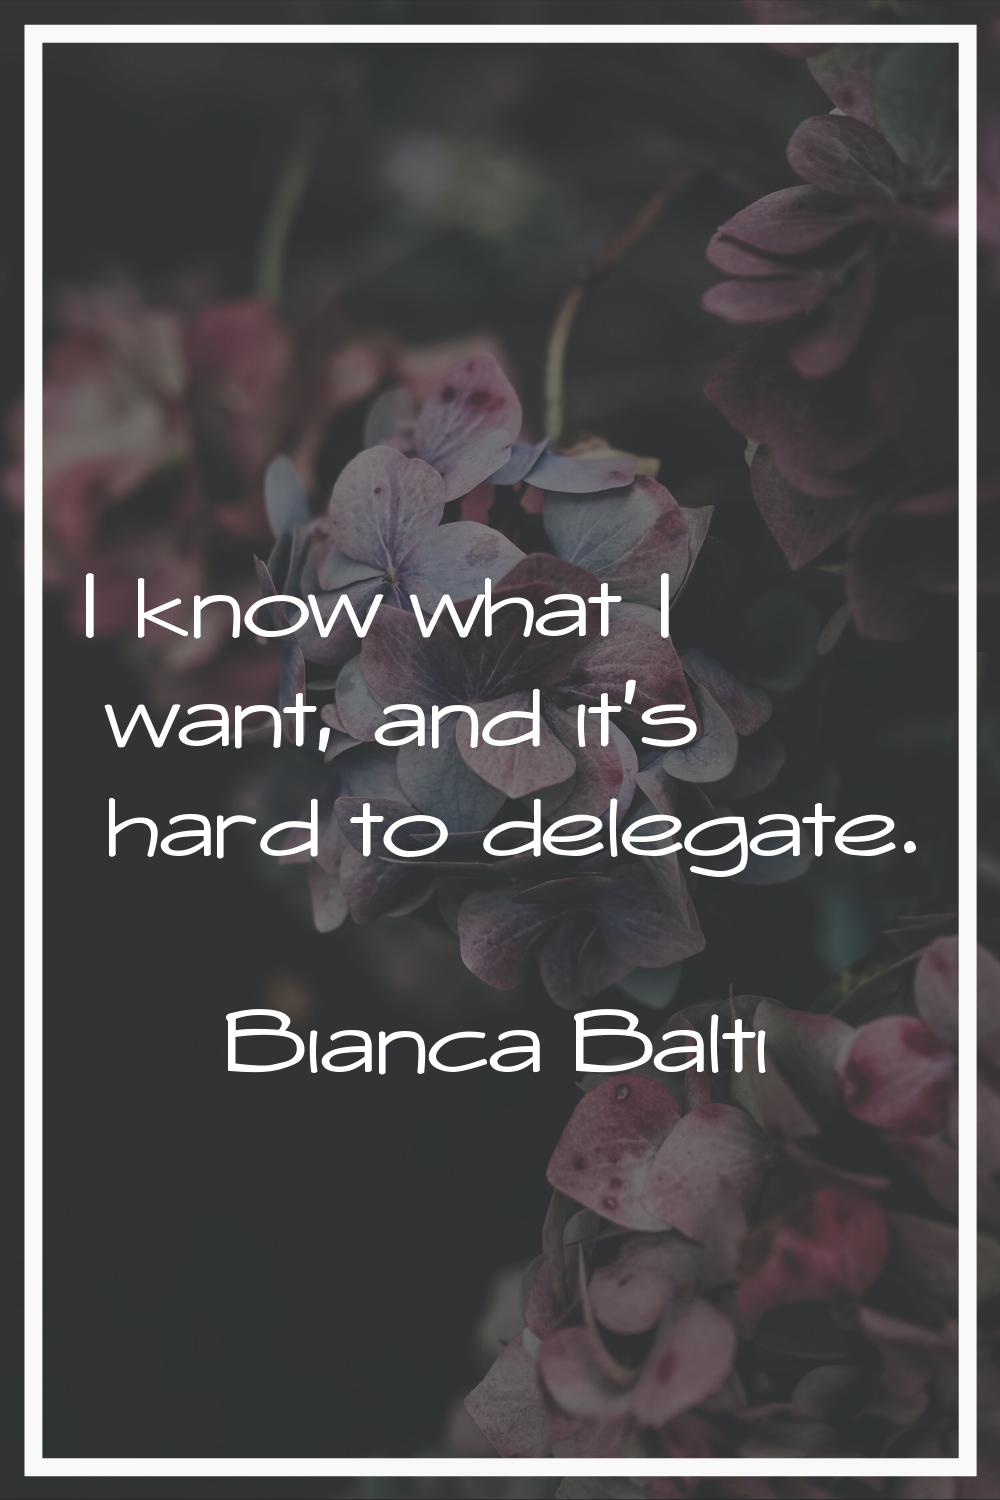 I know what I want, and it's hard to delegate.